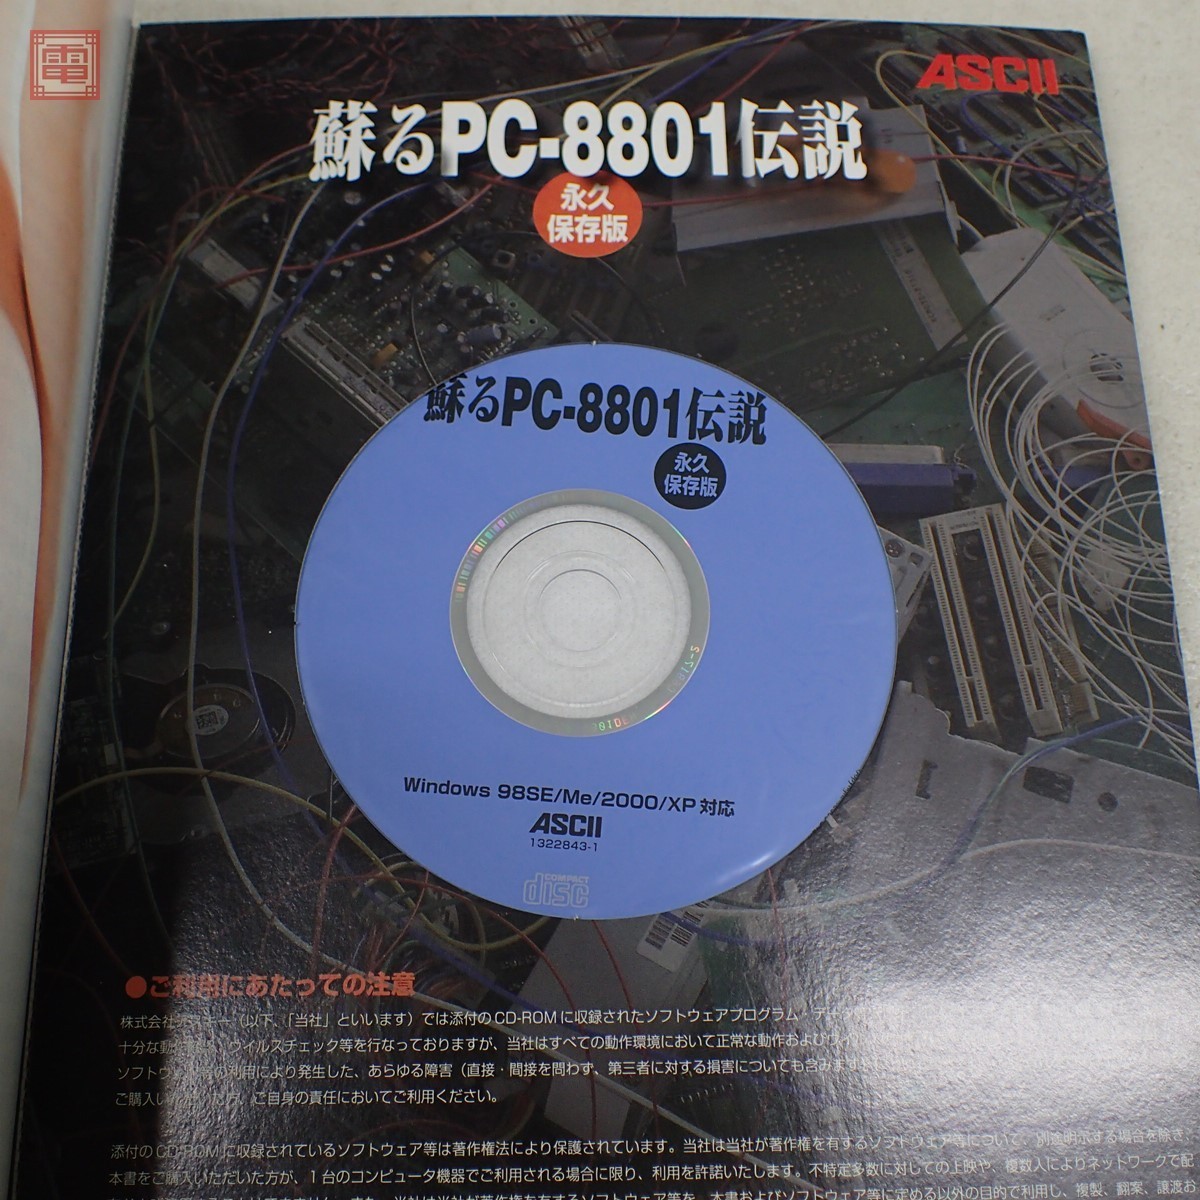  publication ..PC-8801 legend permanent preservation version CD-ROM unopened ASCII ASCII 2006 year issue the first version [PP